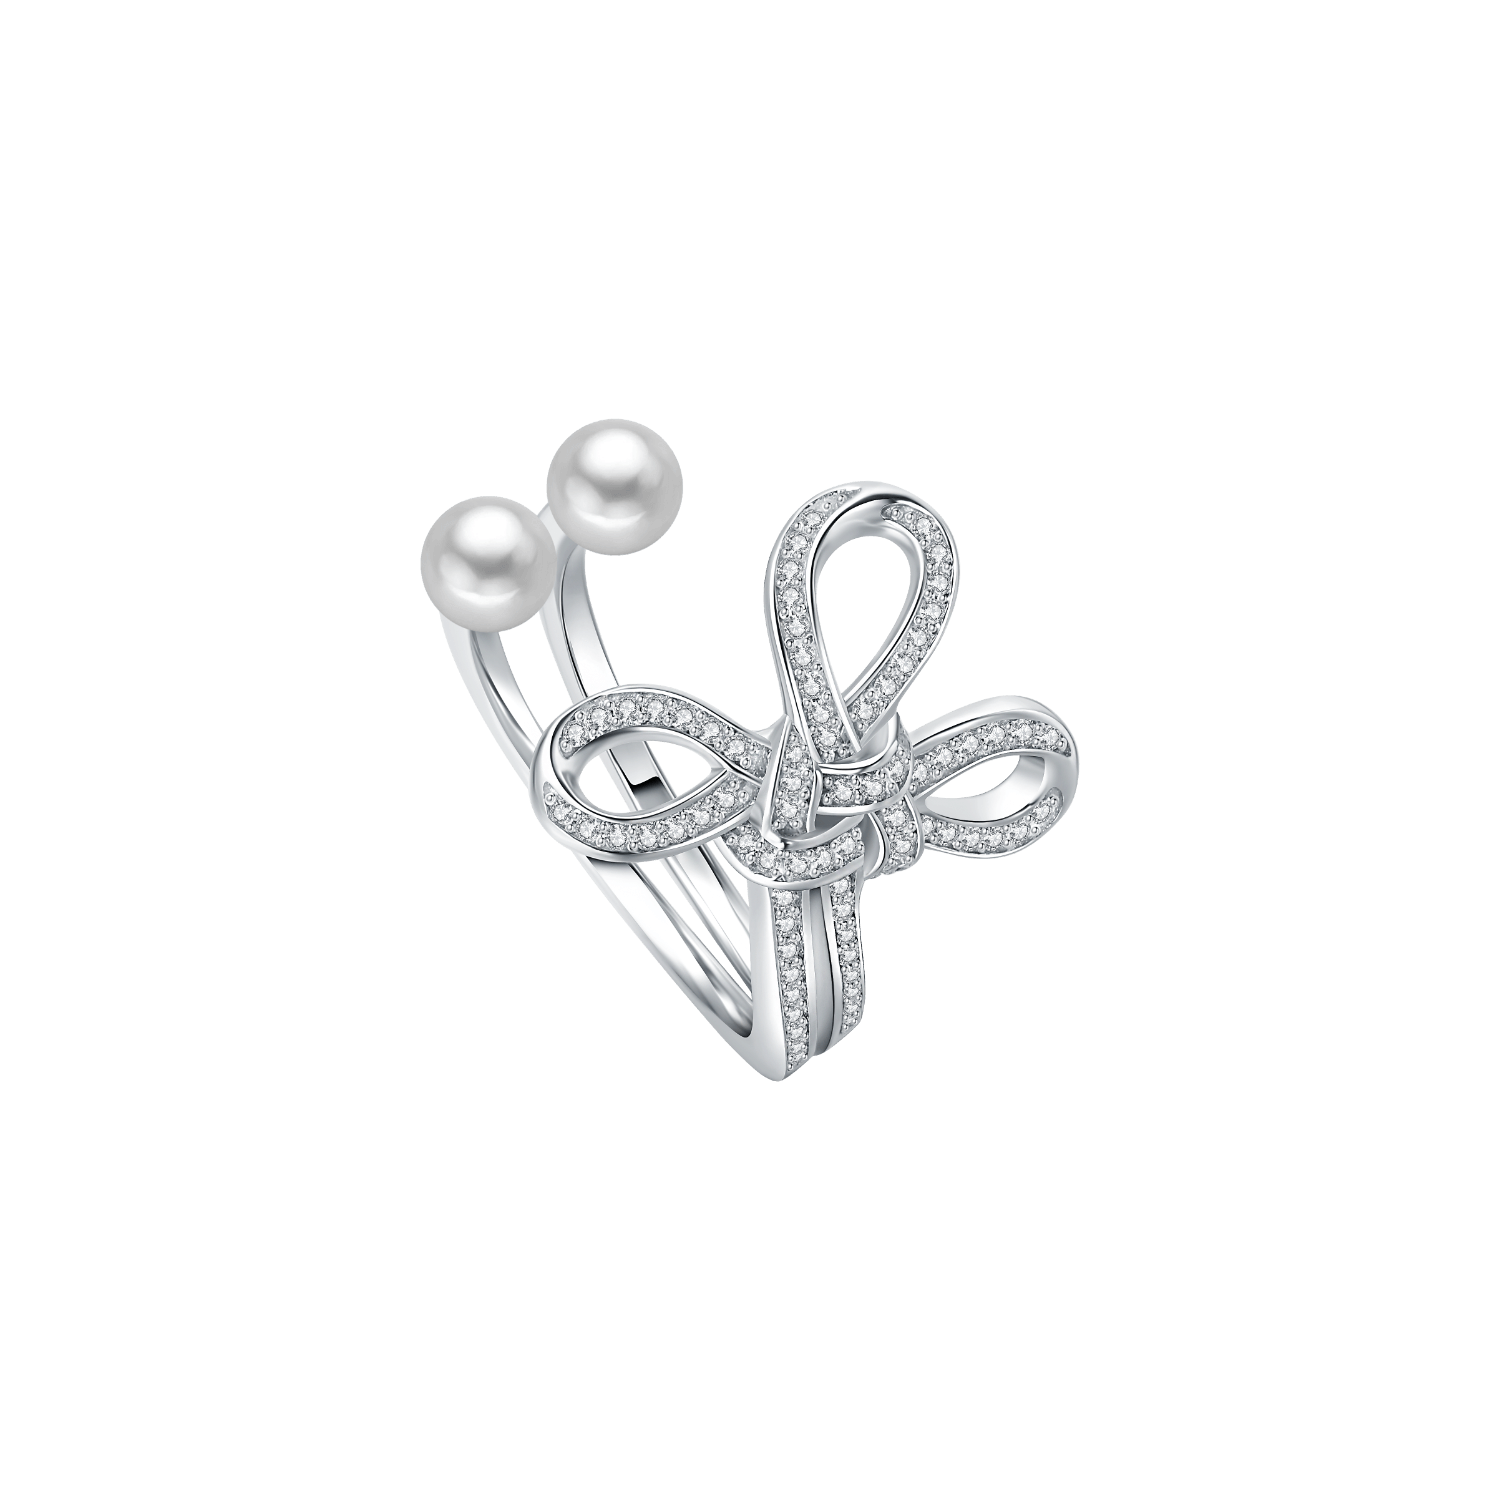 Chinese Knot Open Ring